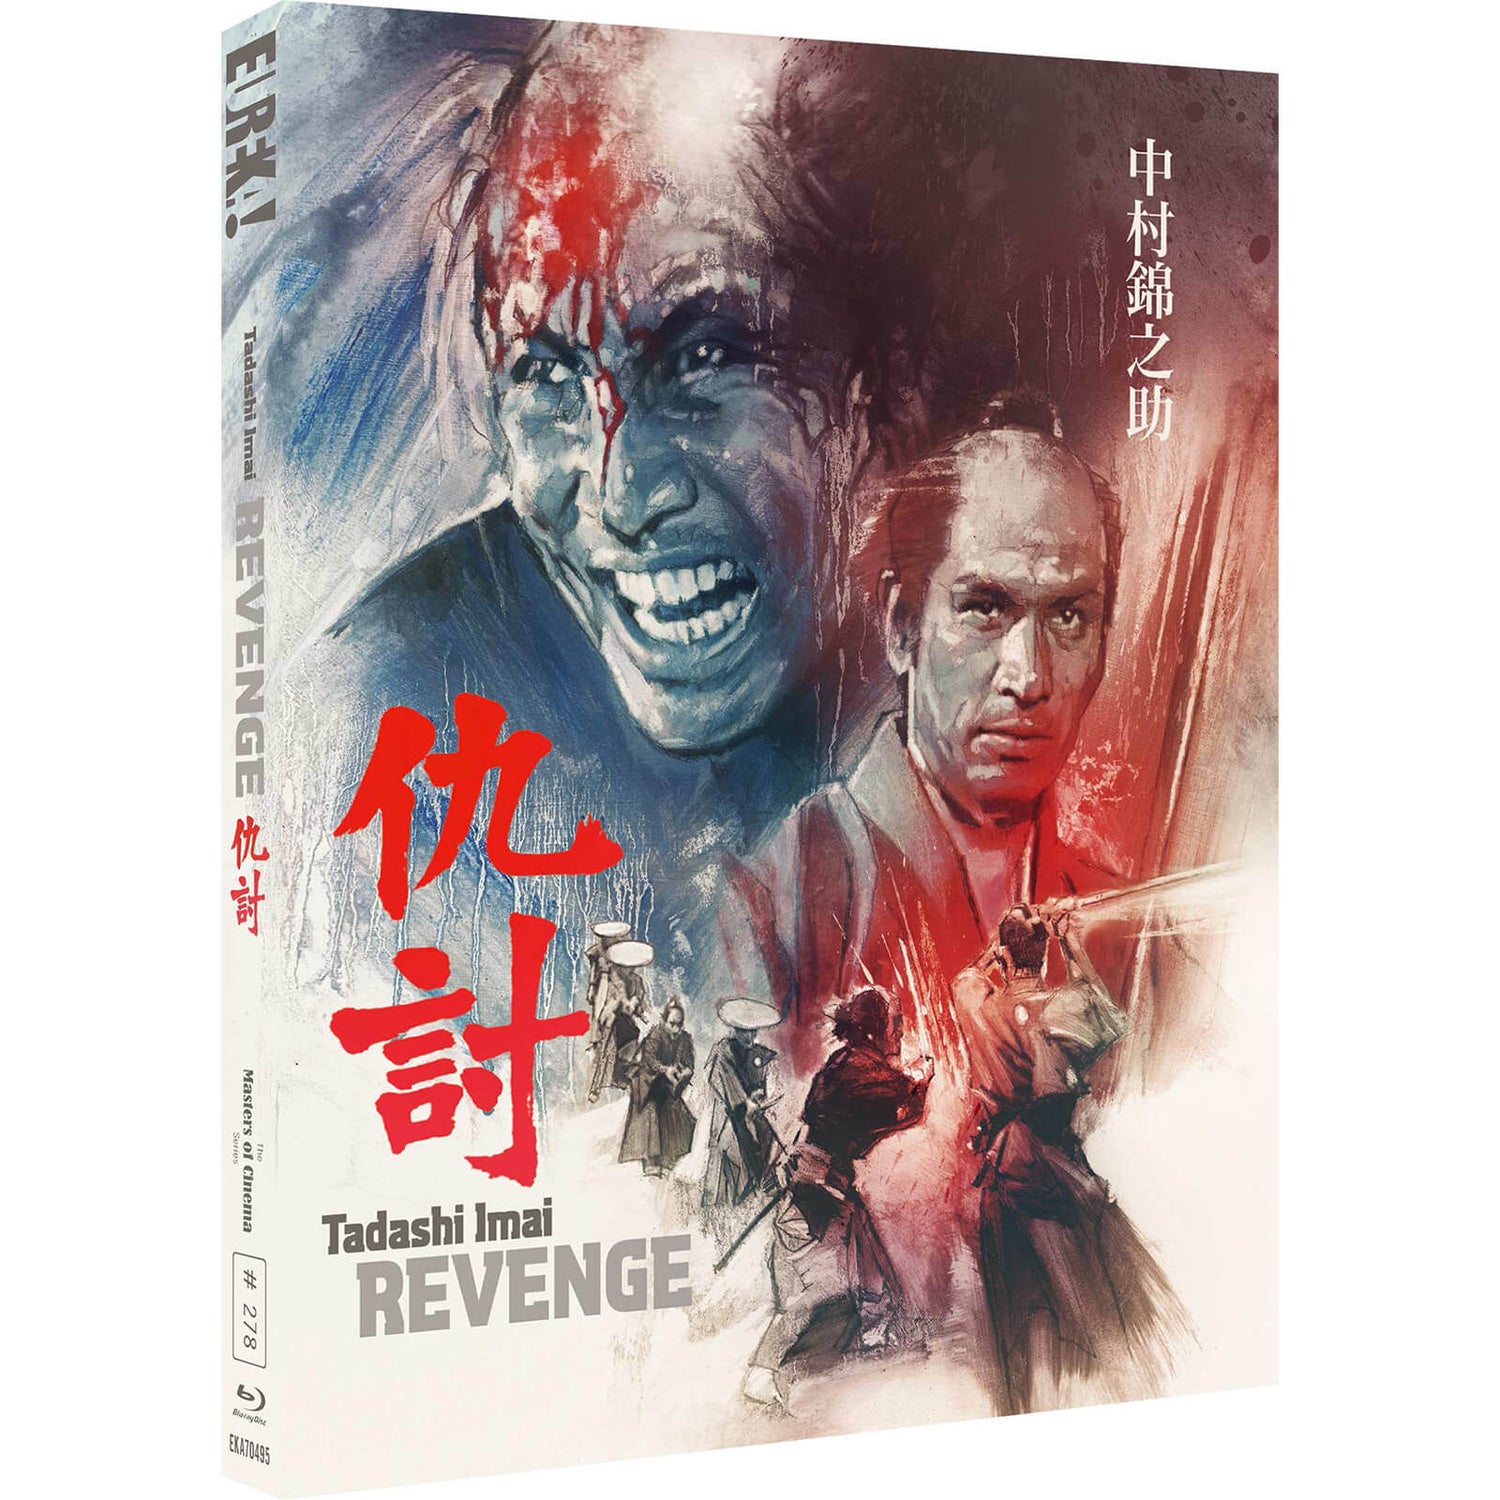 Revenge (Masters of Cinema) Special Edition